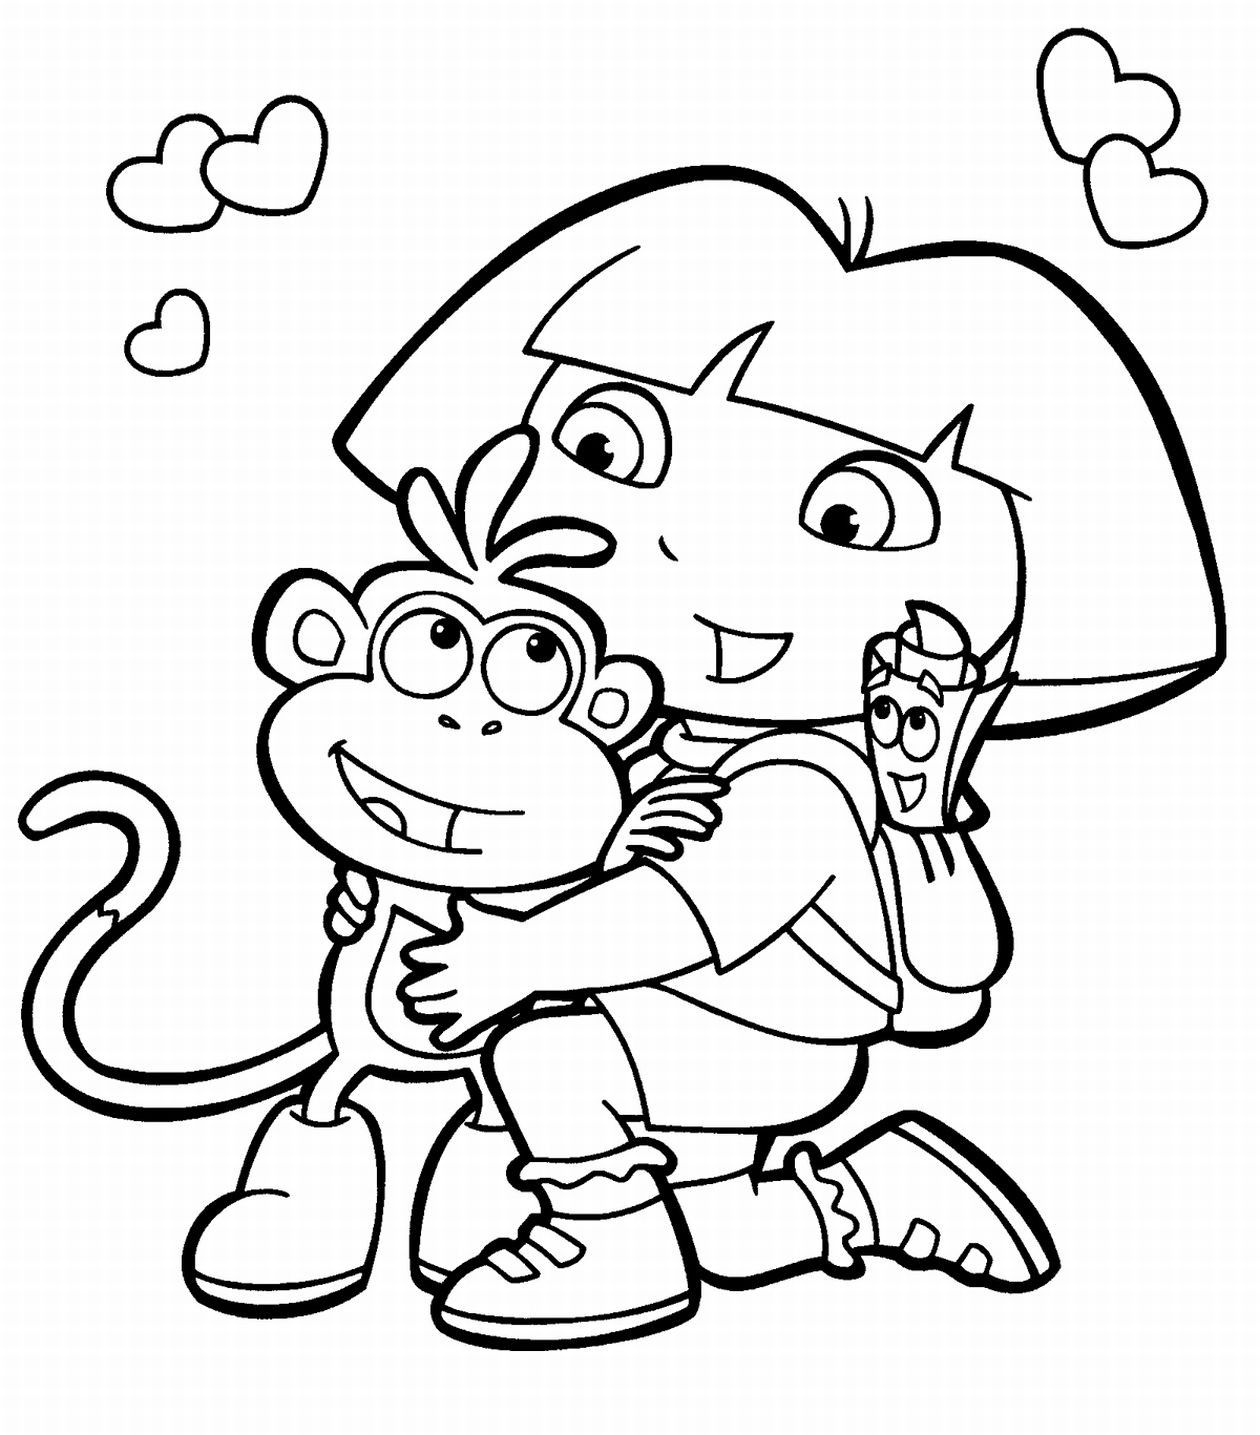 Amazing of Good Free Printable Coloring Pages For Kids O #316